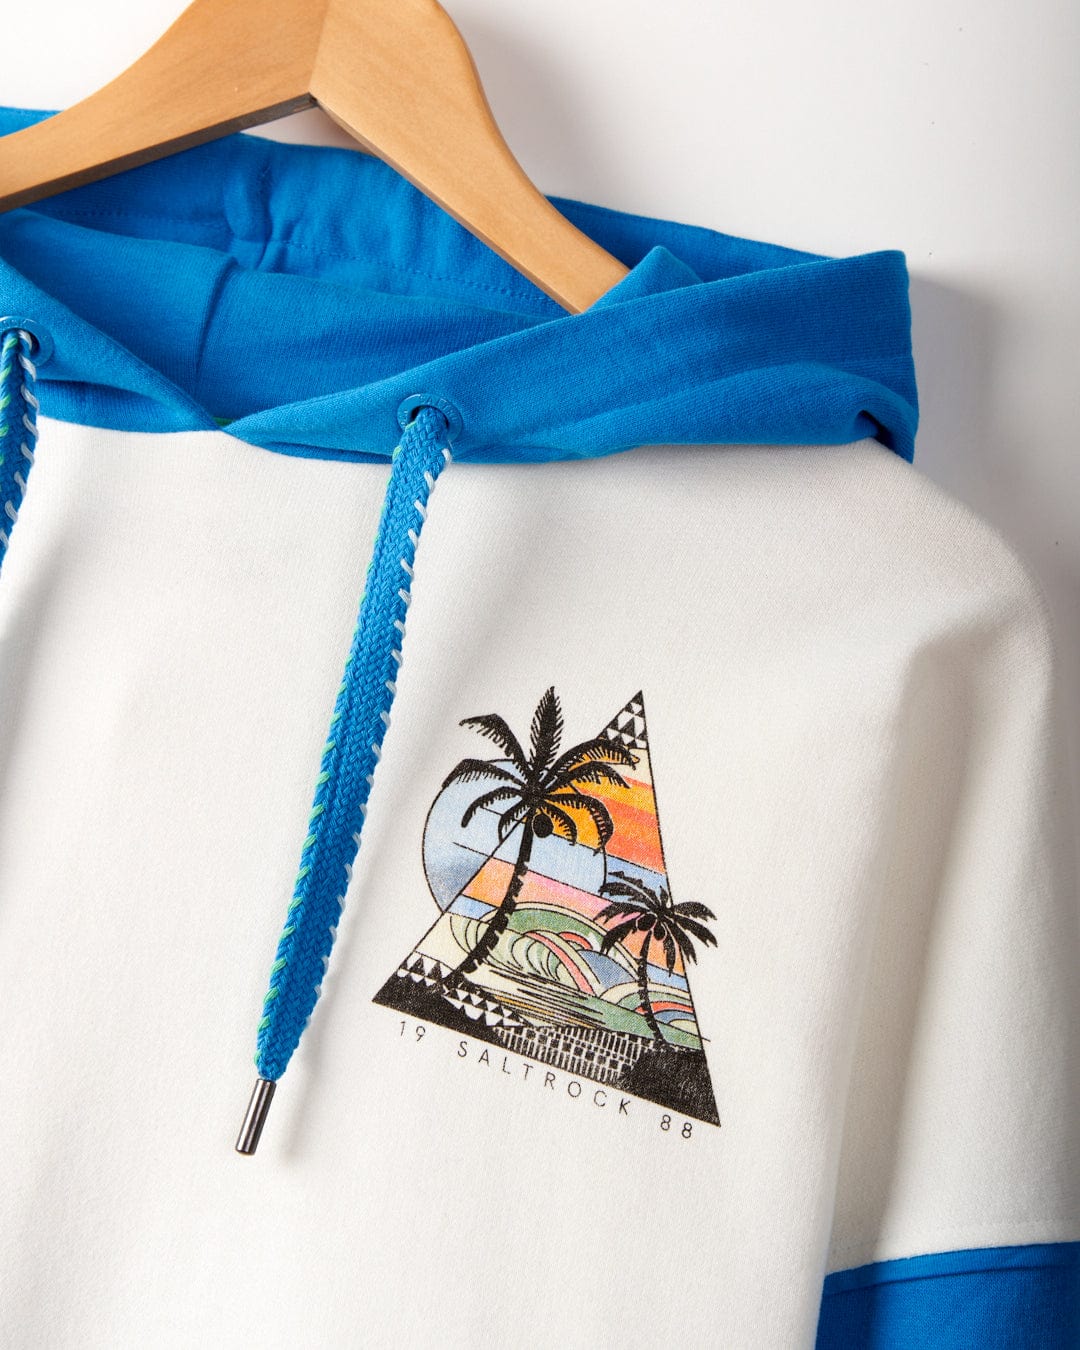 A white and blue hoodie on a hanger, featuring Palm Beach graphics of a tropical sunset scene with palm trees and waves. Text below the graphic reads "19 Saltrock 88." Crafted from 100% cotton, this Geo Beach - Womens Pop Hoodie - White also showcases signature Saltrock branding.